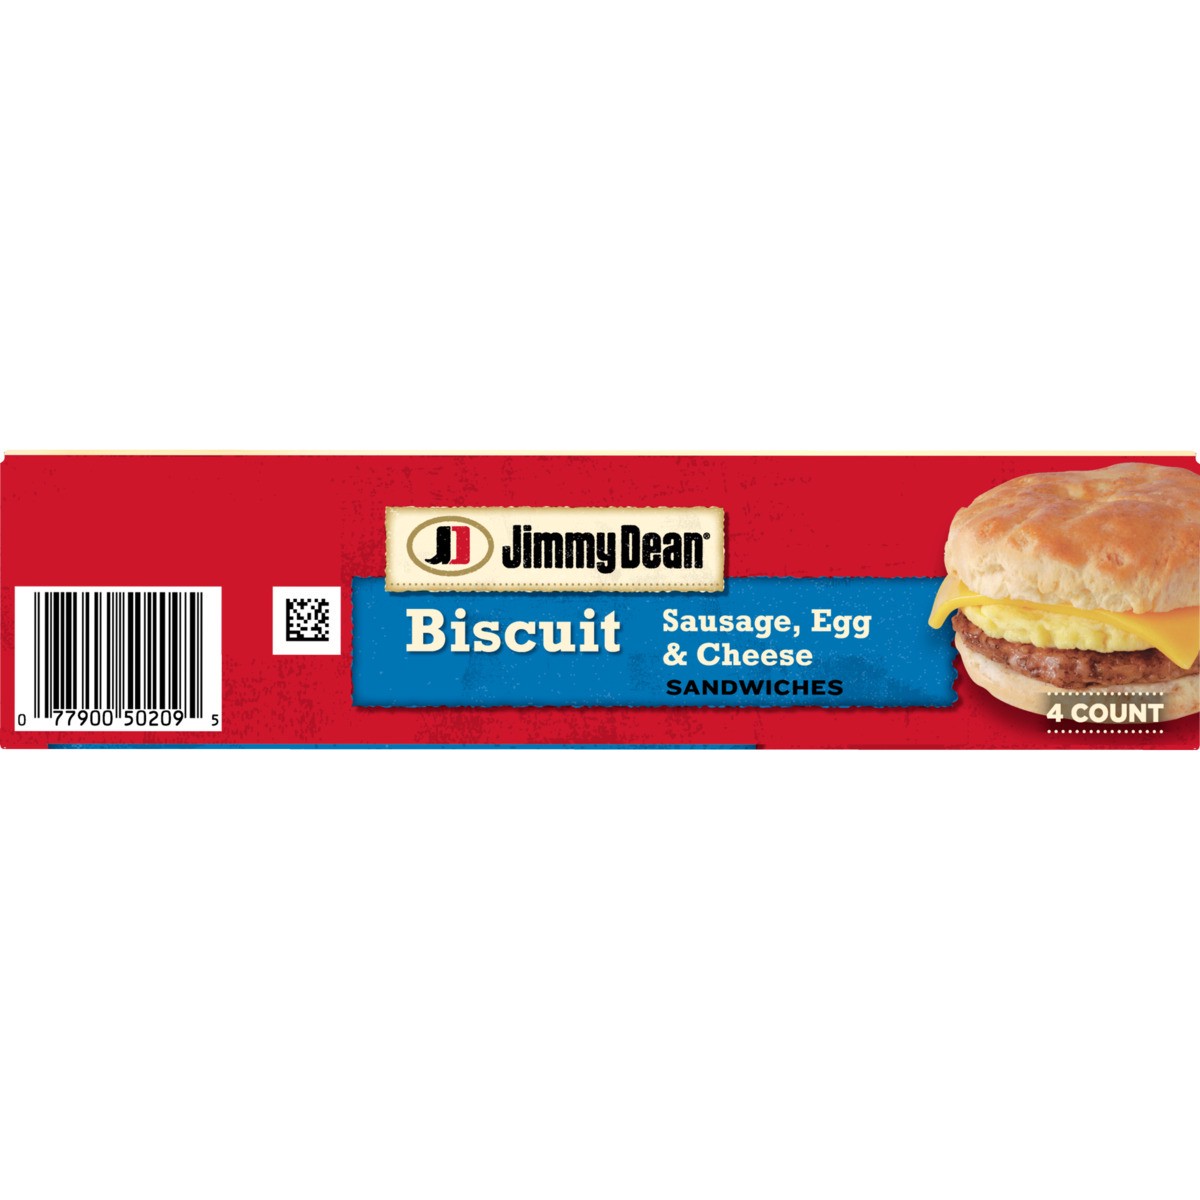 slide 9 of 9, Jimmy Dean Biscuit Breakfast Sandwiches with Sausage, Egg, and Cheese, Frozen, 4 Count, 510.29 g